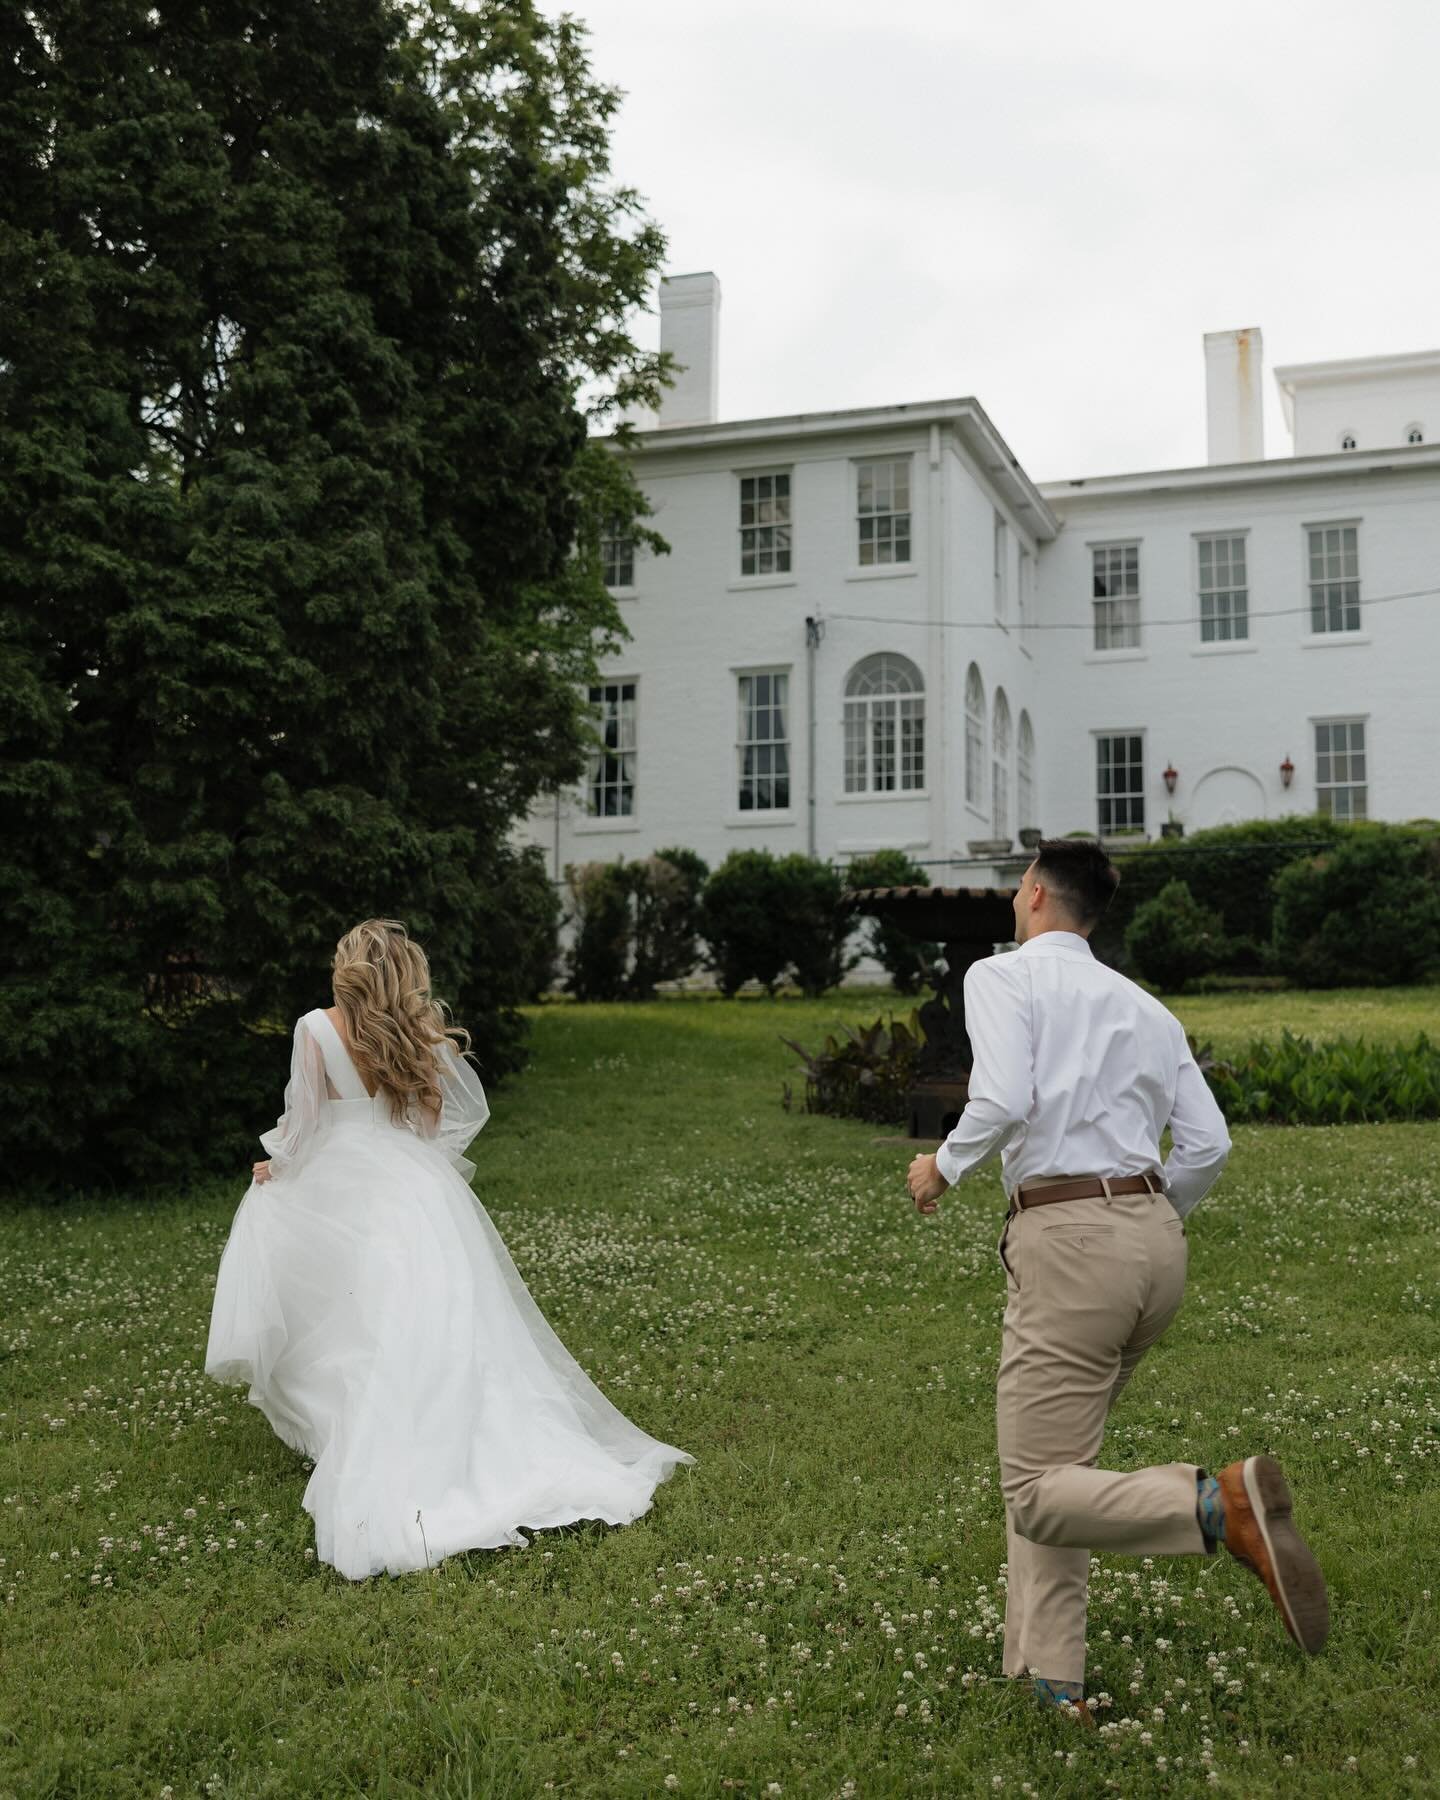 running around with kris &amp; case was like a scene from a movie

venue: @bleakhouse_knox 
dress: @aw.bridal 

use my code savanah15 @aw.bridal for 15% site wide! 

#eastcoastweddingphotographer #tennesseeweddingphotographer #authenticlovemag #knoxv